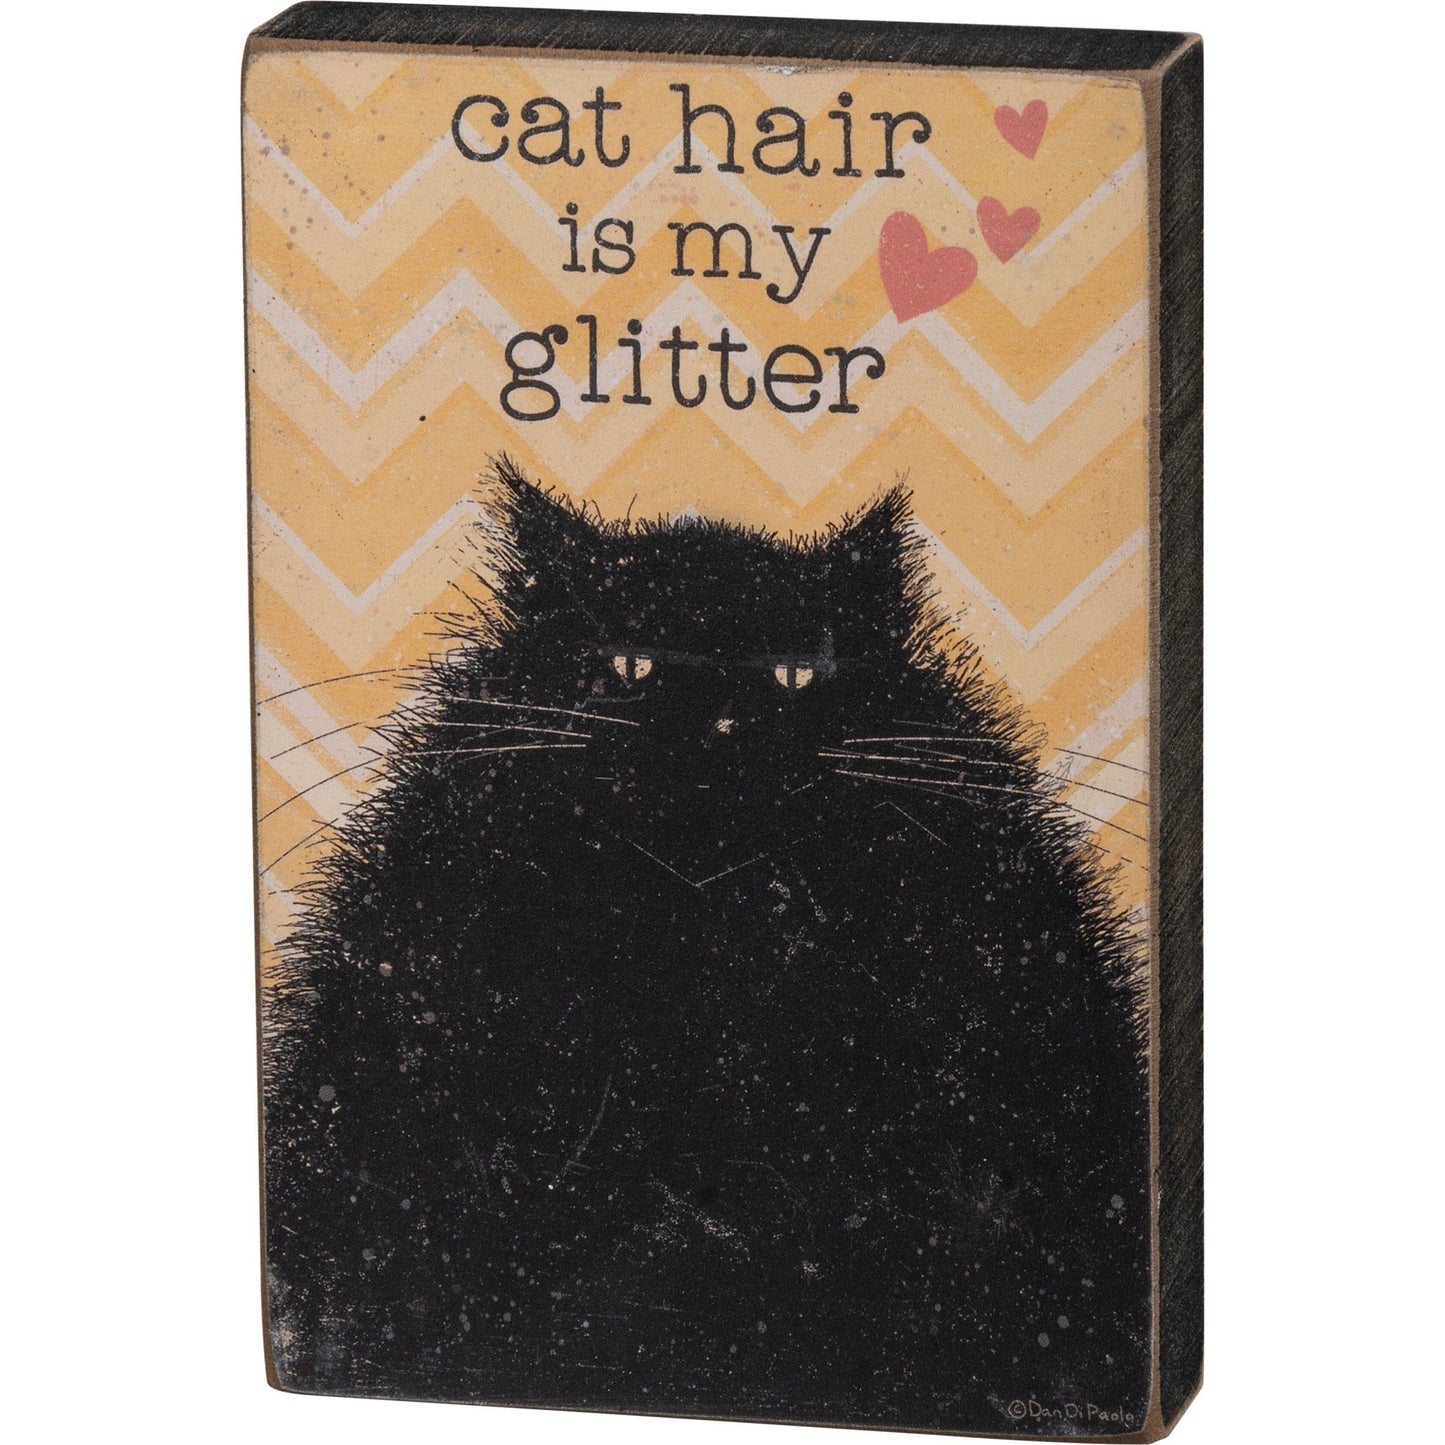 Cat Hair Is My Glitter Block Sign | Freestanding or Hangable | Wood Wall or Table Decor